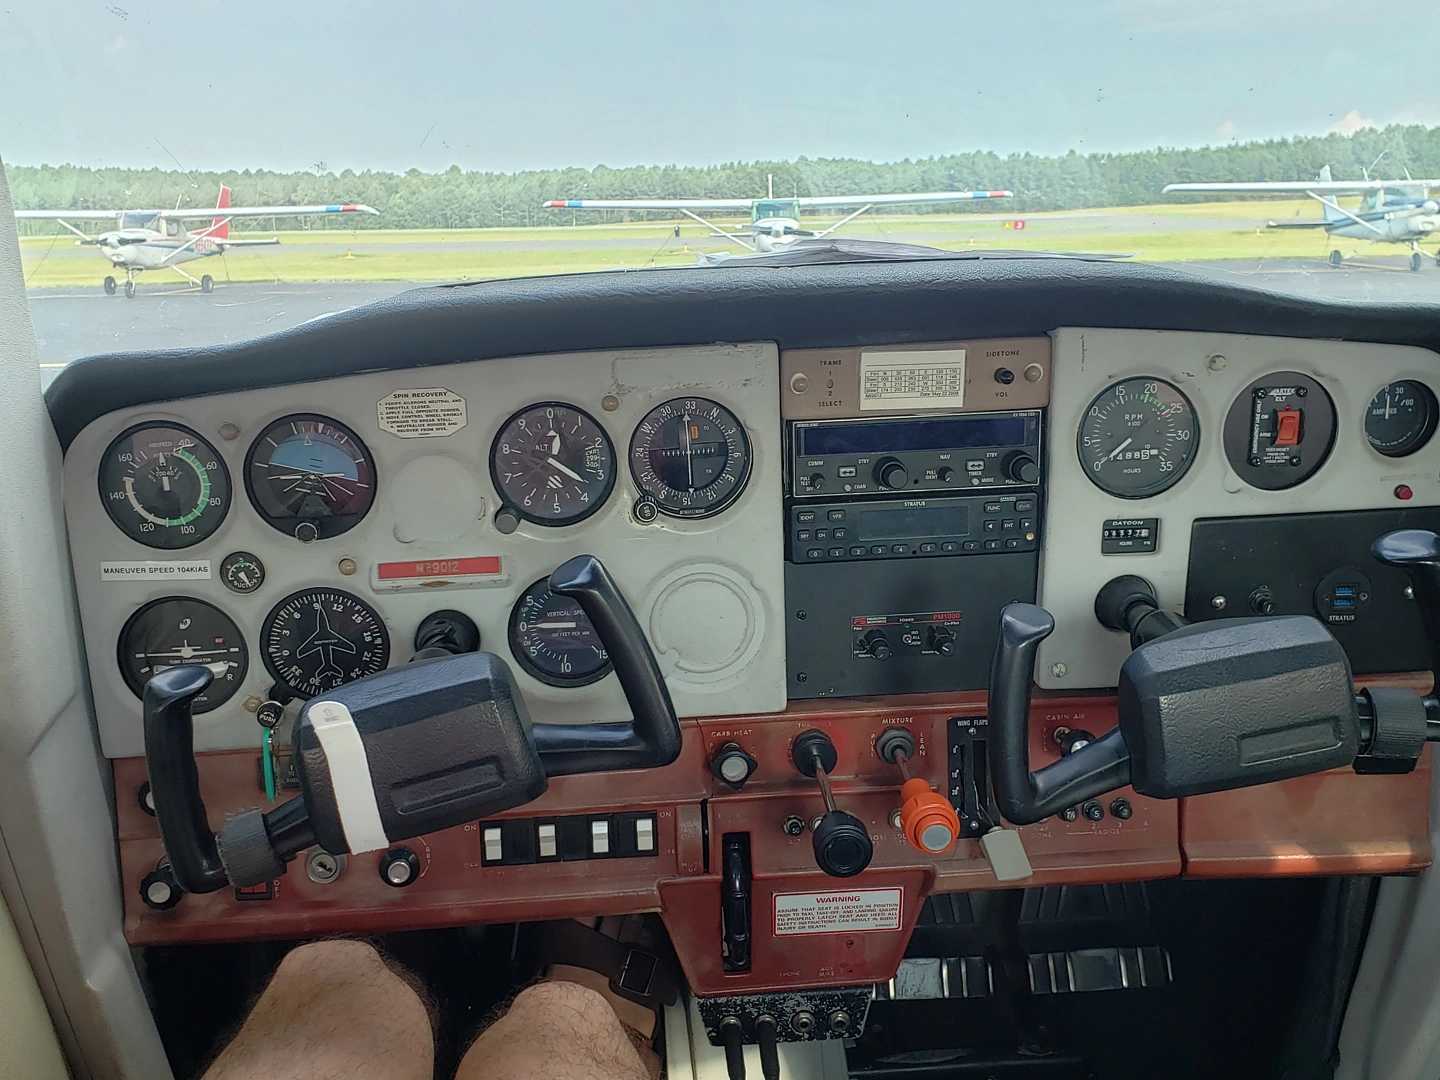 The cockpit of a Cessna 152, yokes, gauges, etc. Outside you can see other planes on the ramp.